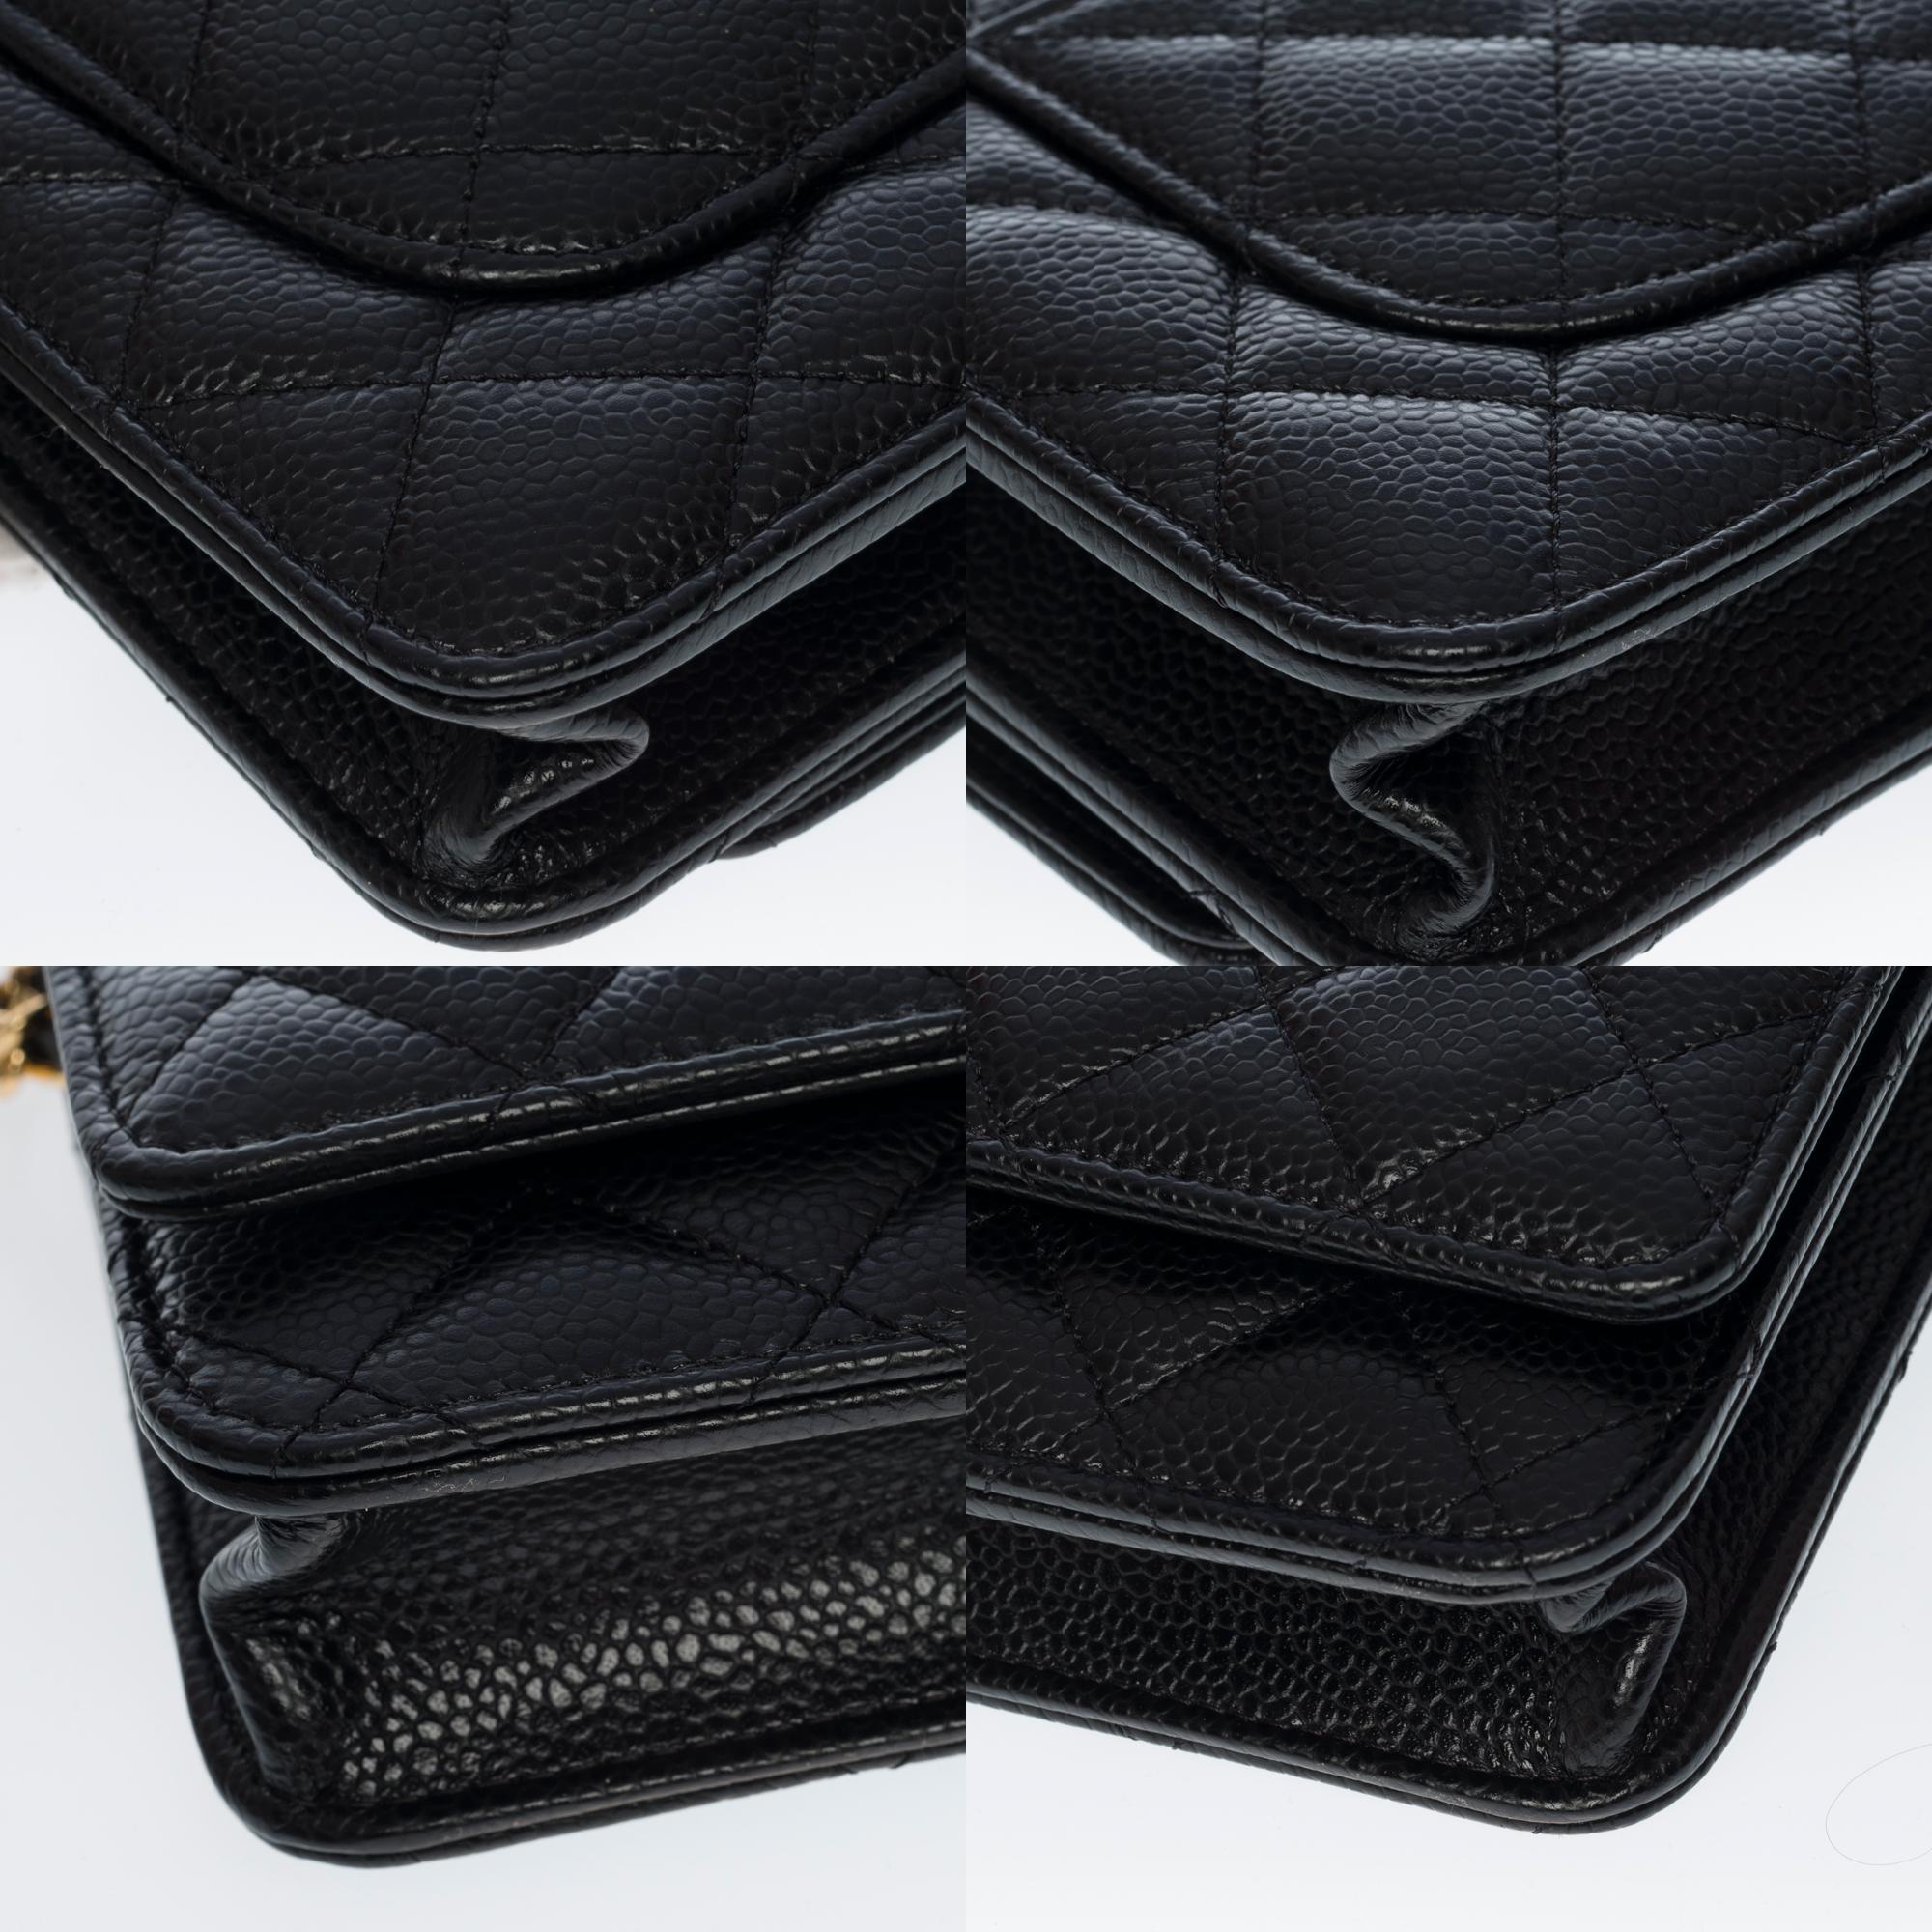 Chanel Wallet on Chain (WOC)  shoulder bag in black Caviar quilted leather, GHW 6